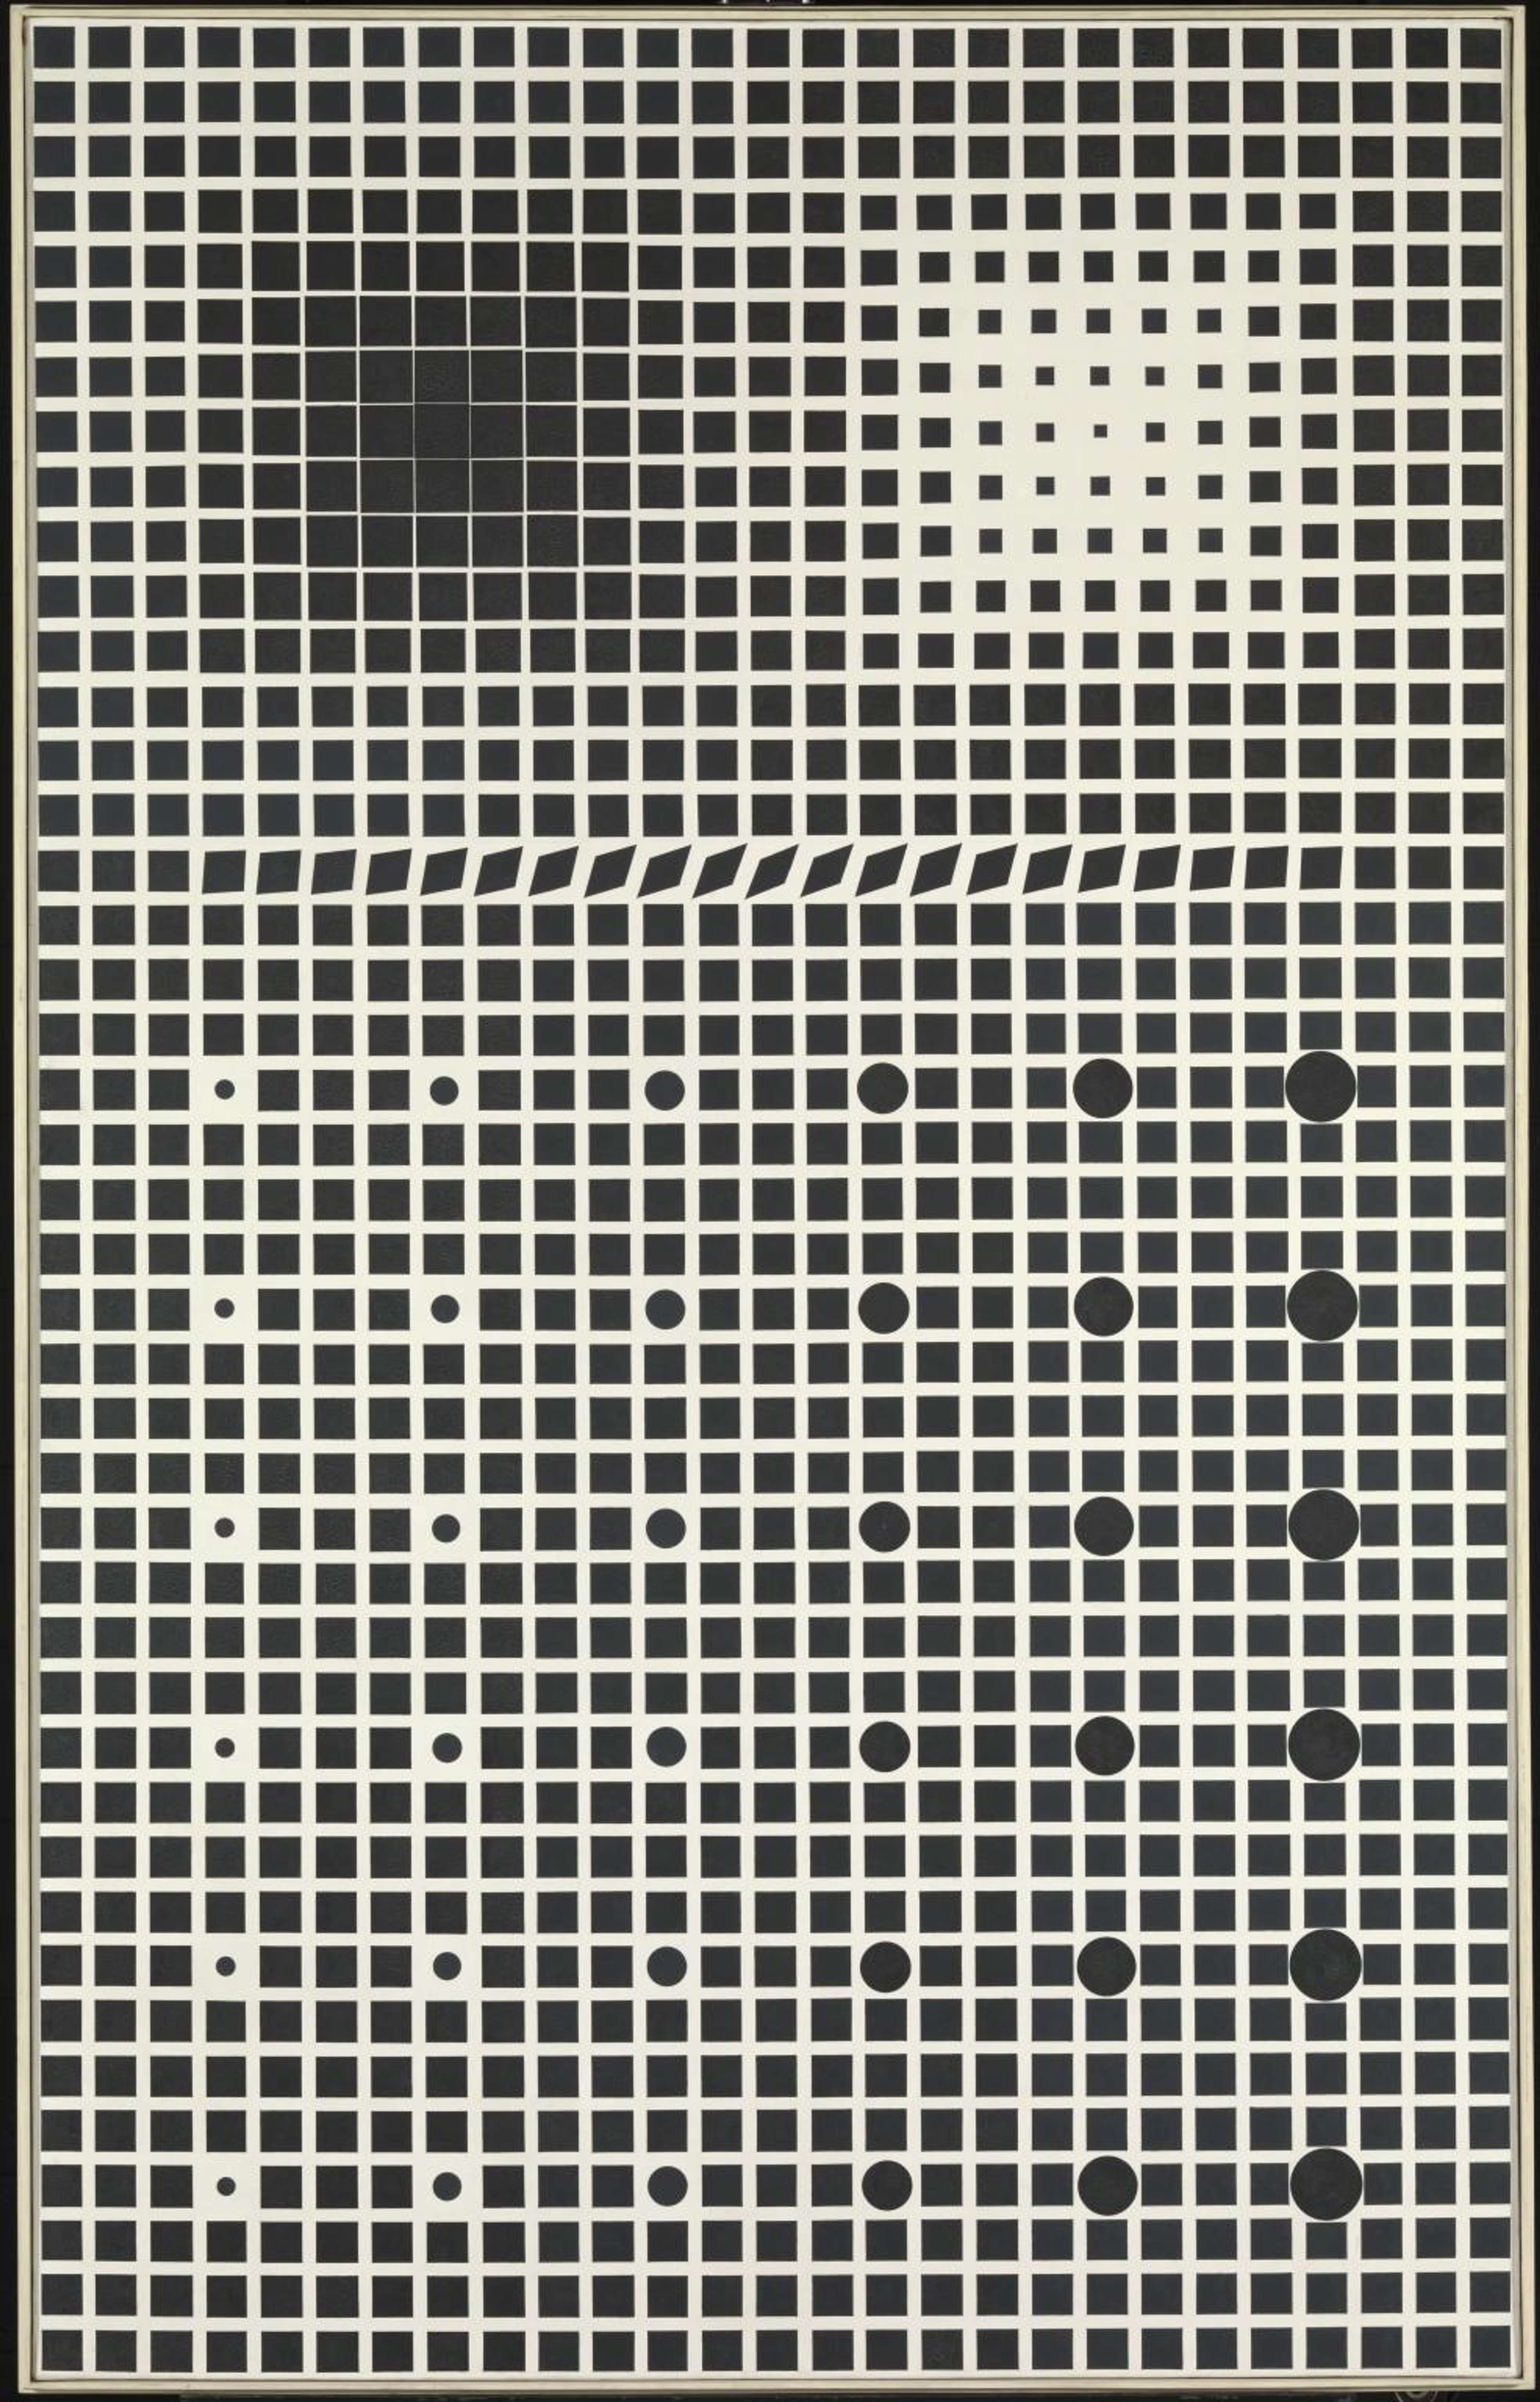 The painting features a grid-like pattern of interlocking geometric shapes in monochromatic colours, creating two optical contrasting squares in the upper portion of the work and a series of smaller sqaures in the lower portion separated by a grid-like pattern of circles.